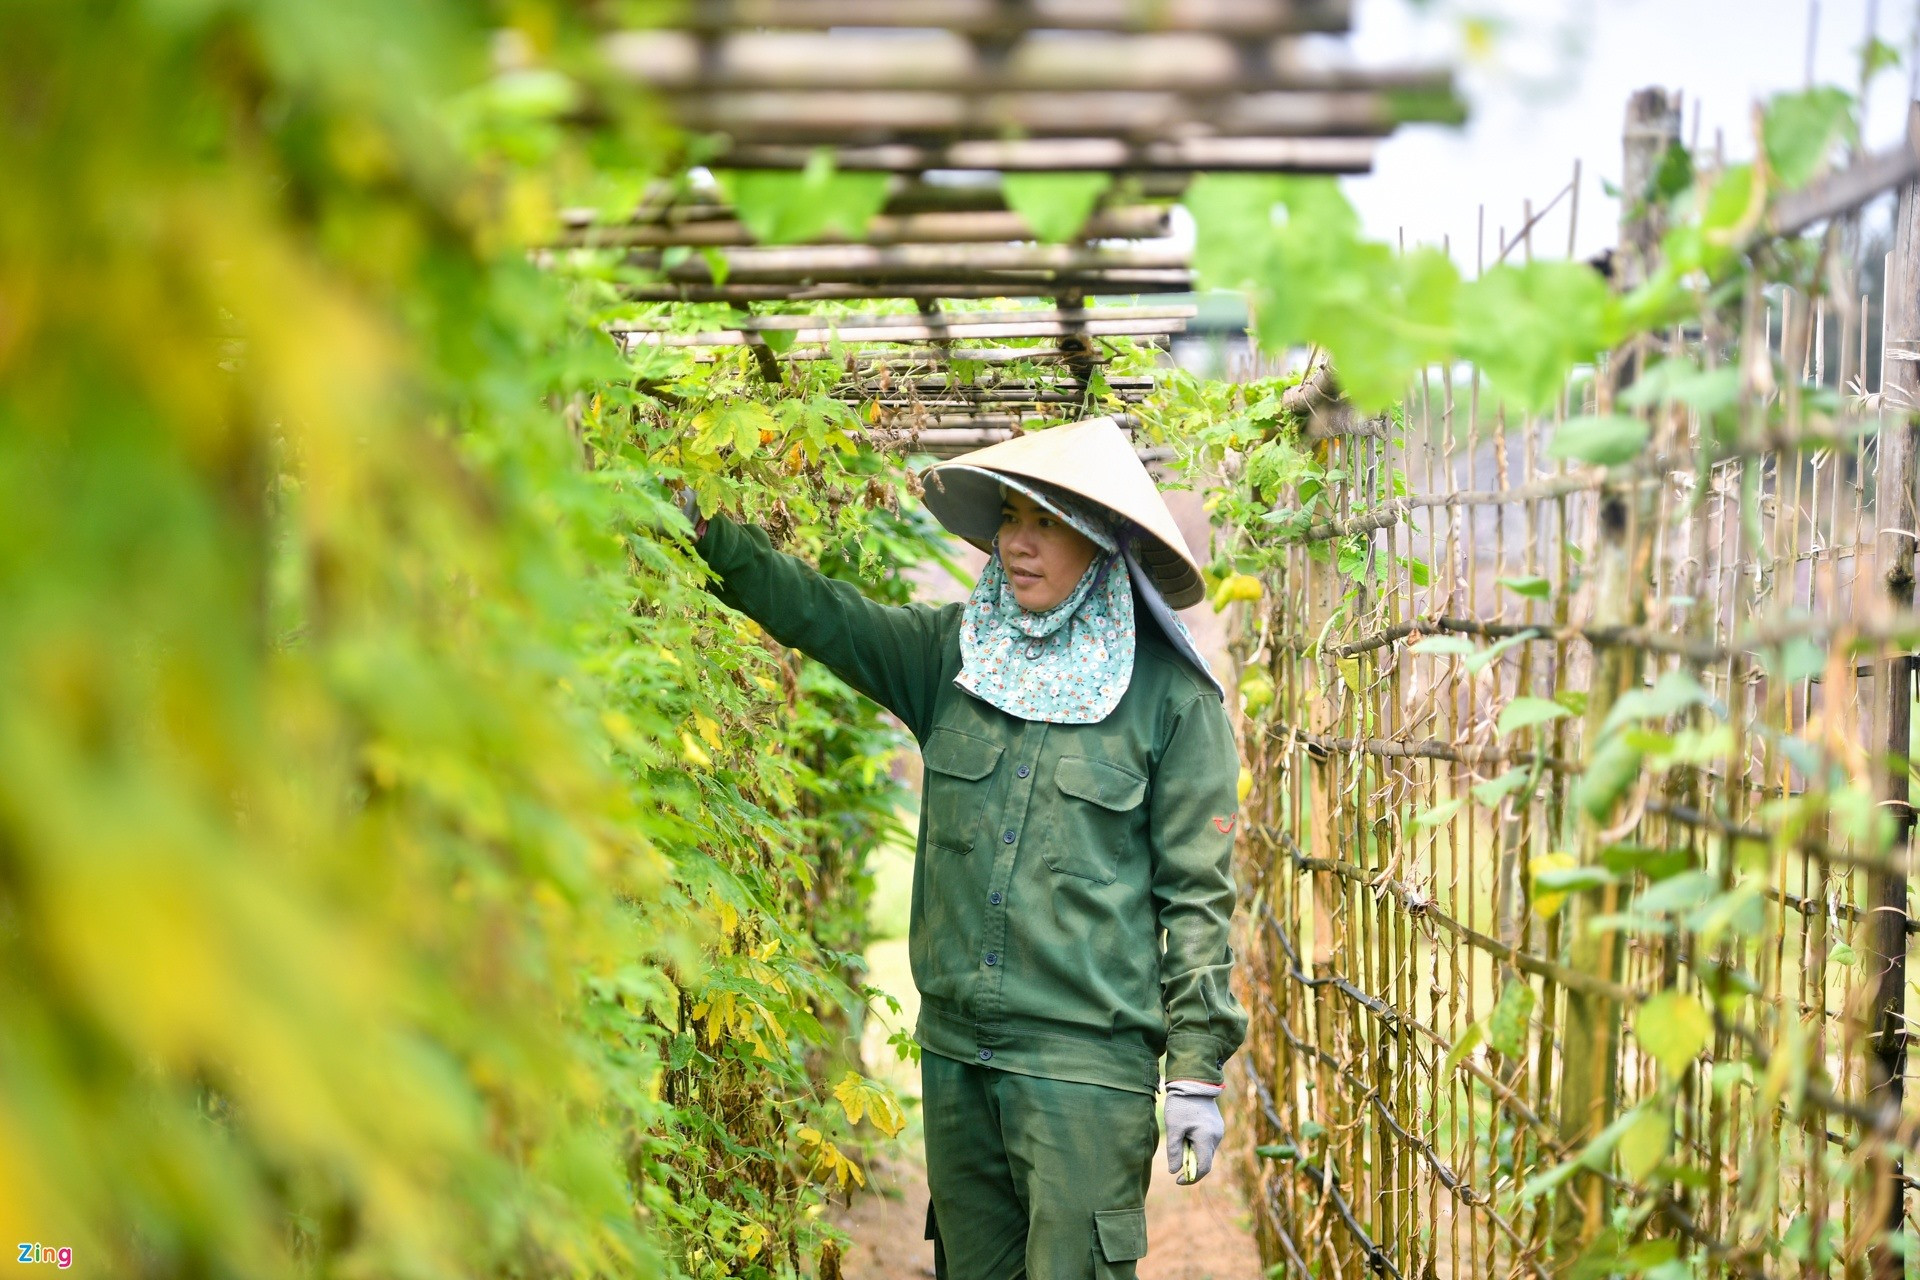 According to Anton Bespalov, director of TUI BLUE Hoi An resort, the organic vegetable garden helps the resort be cost-effective. At the same time, the health of resort employees and visitors is also ensured.  The resort is planned to expand the garden in the near future.